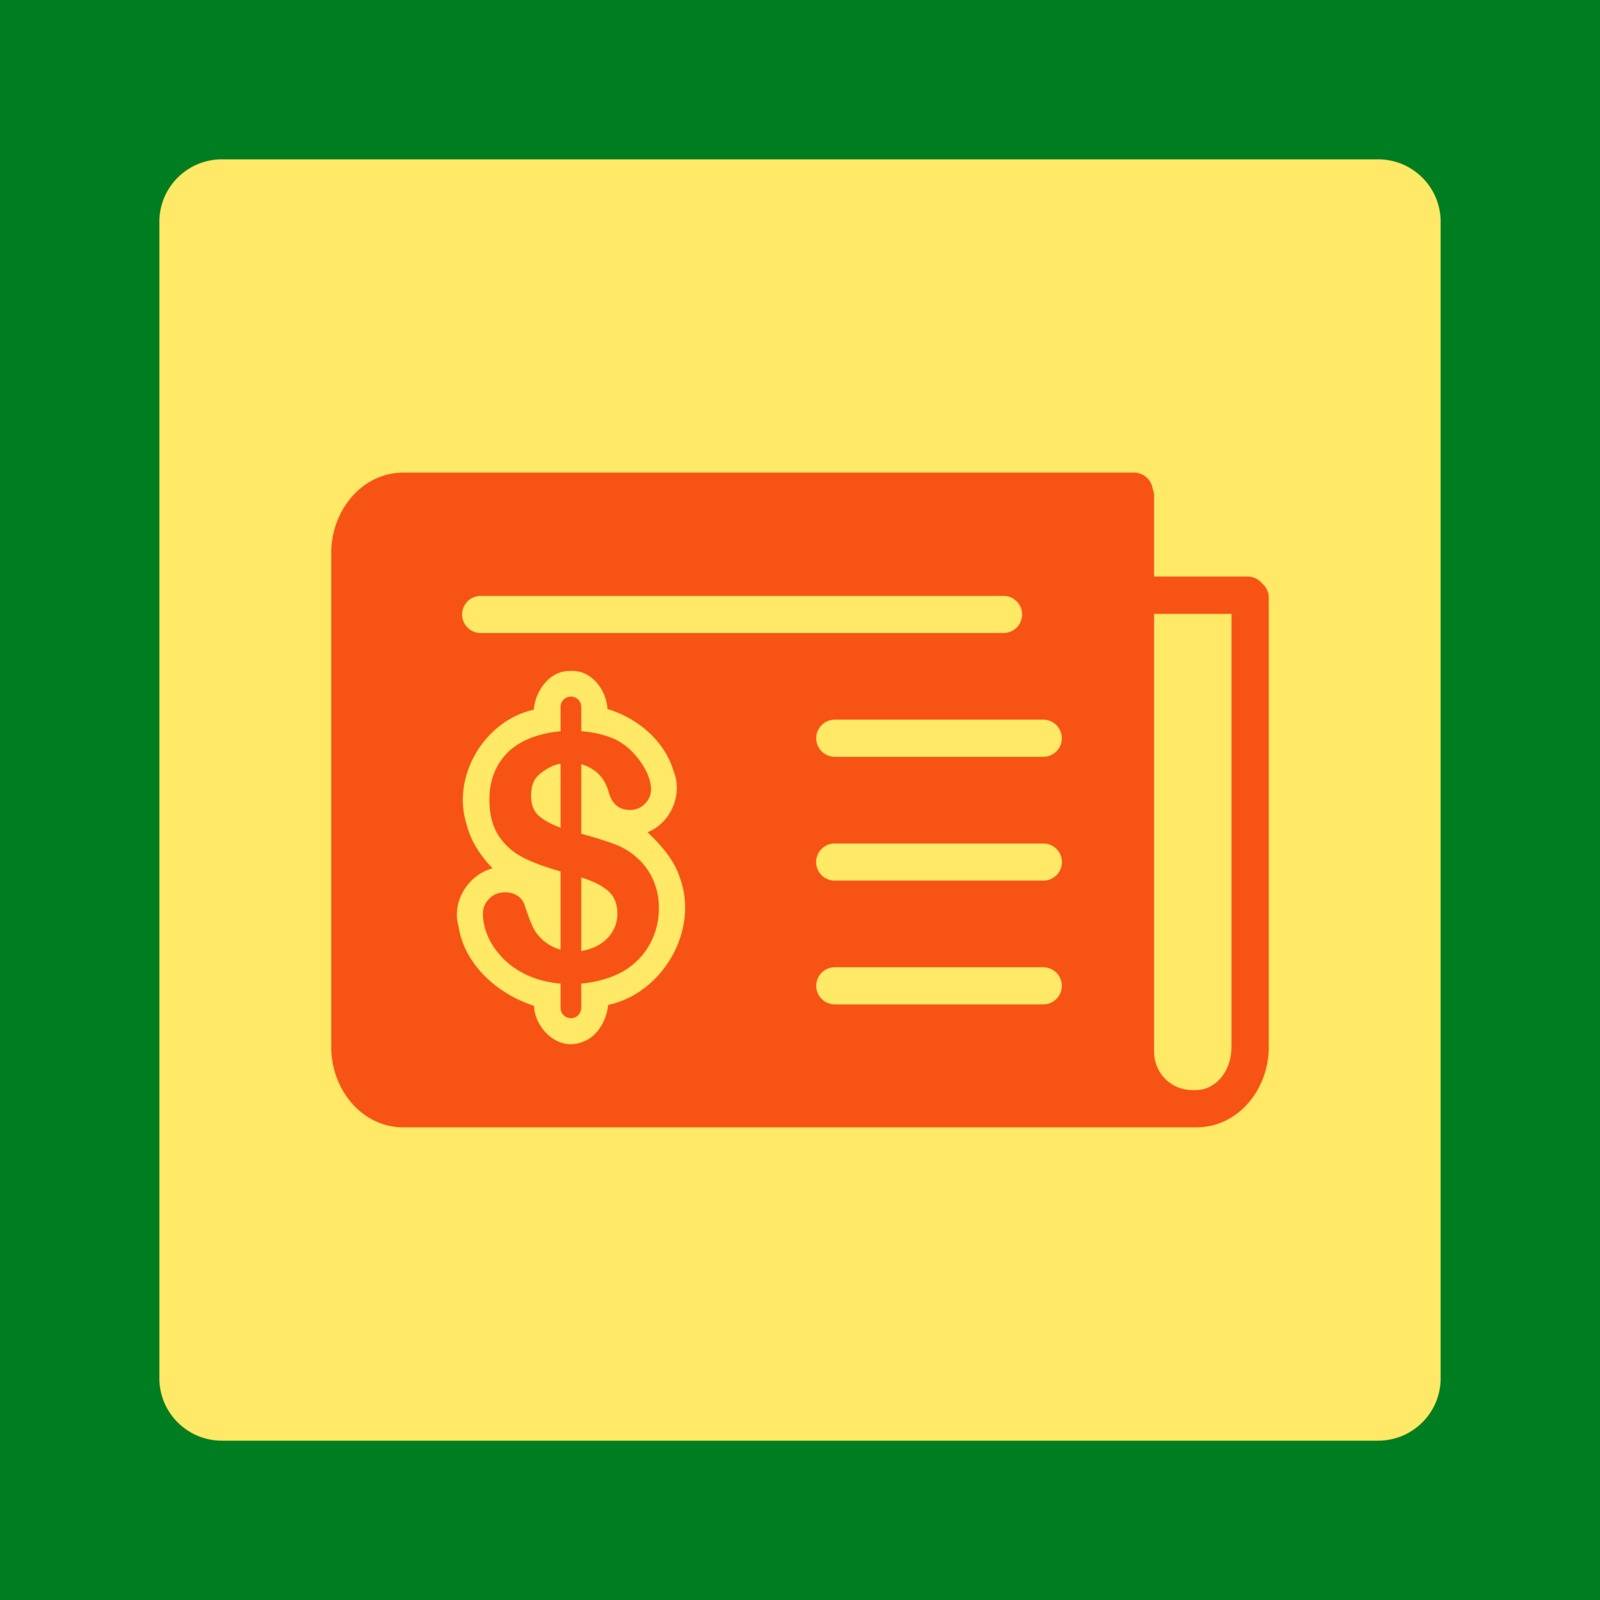 Financial News icon from Commerce Buttons OverColor Set. Vector style is orange and yellow colors, flat square rounded button, green background.